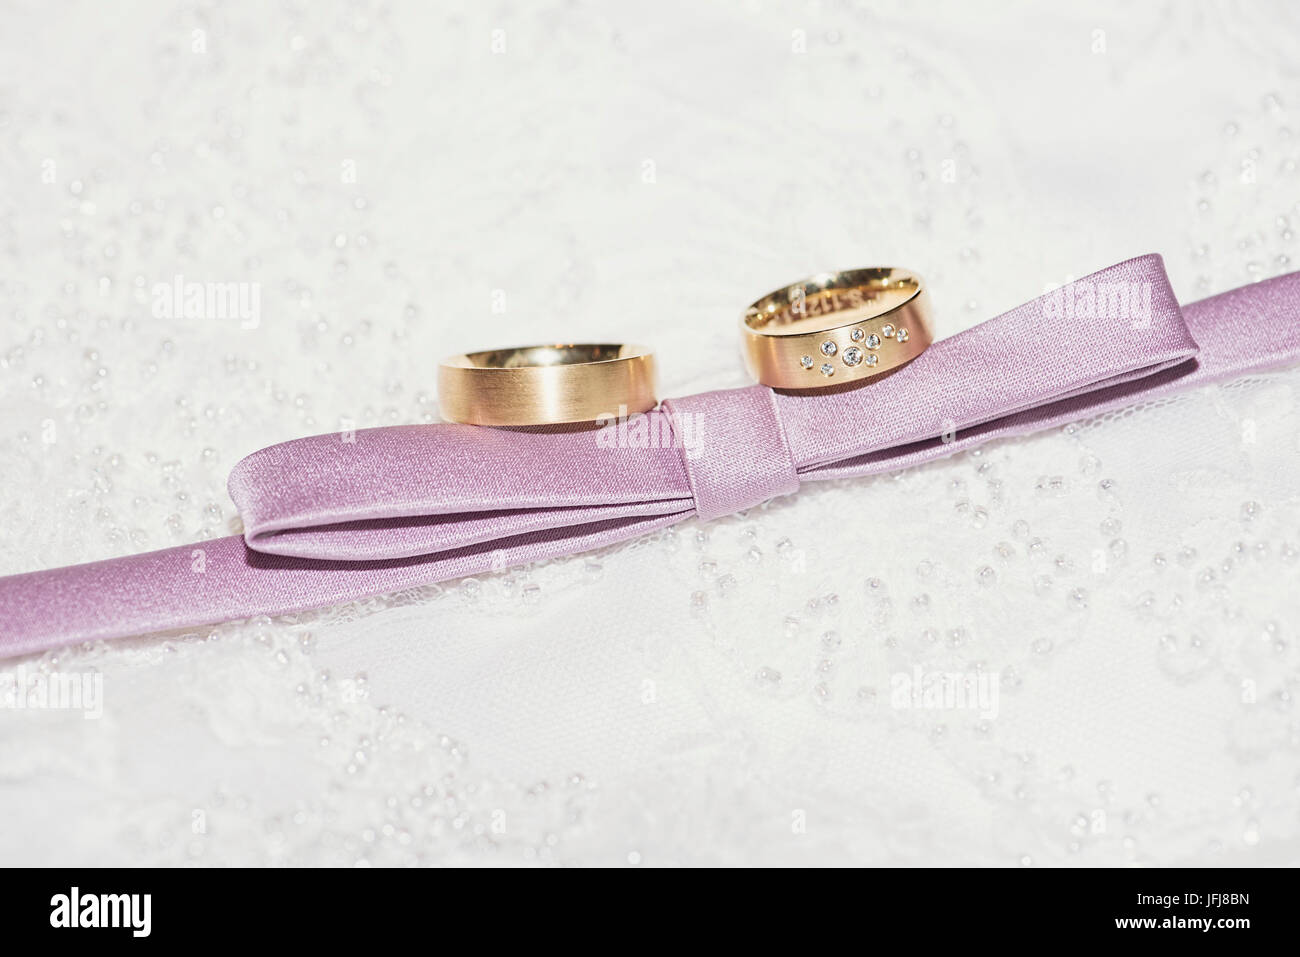 Wedding rings made of gold with diamonds and mauve ribbon on a background made of lacy Stock Photo